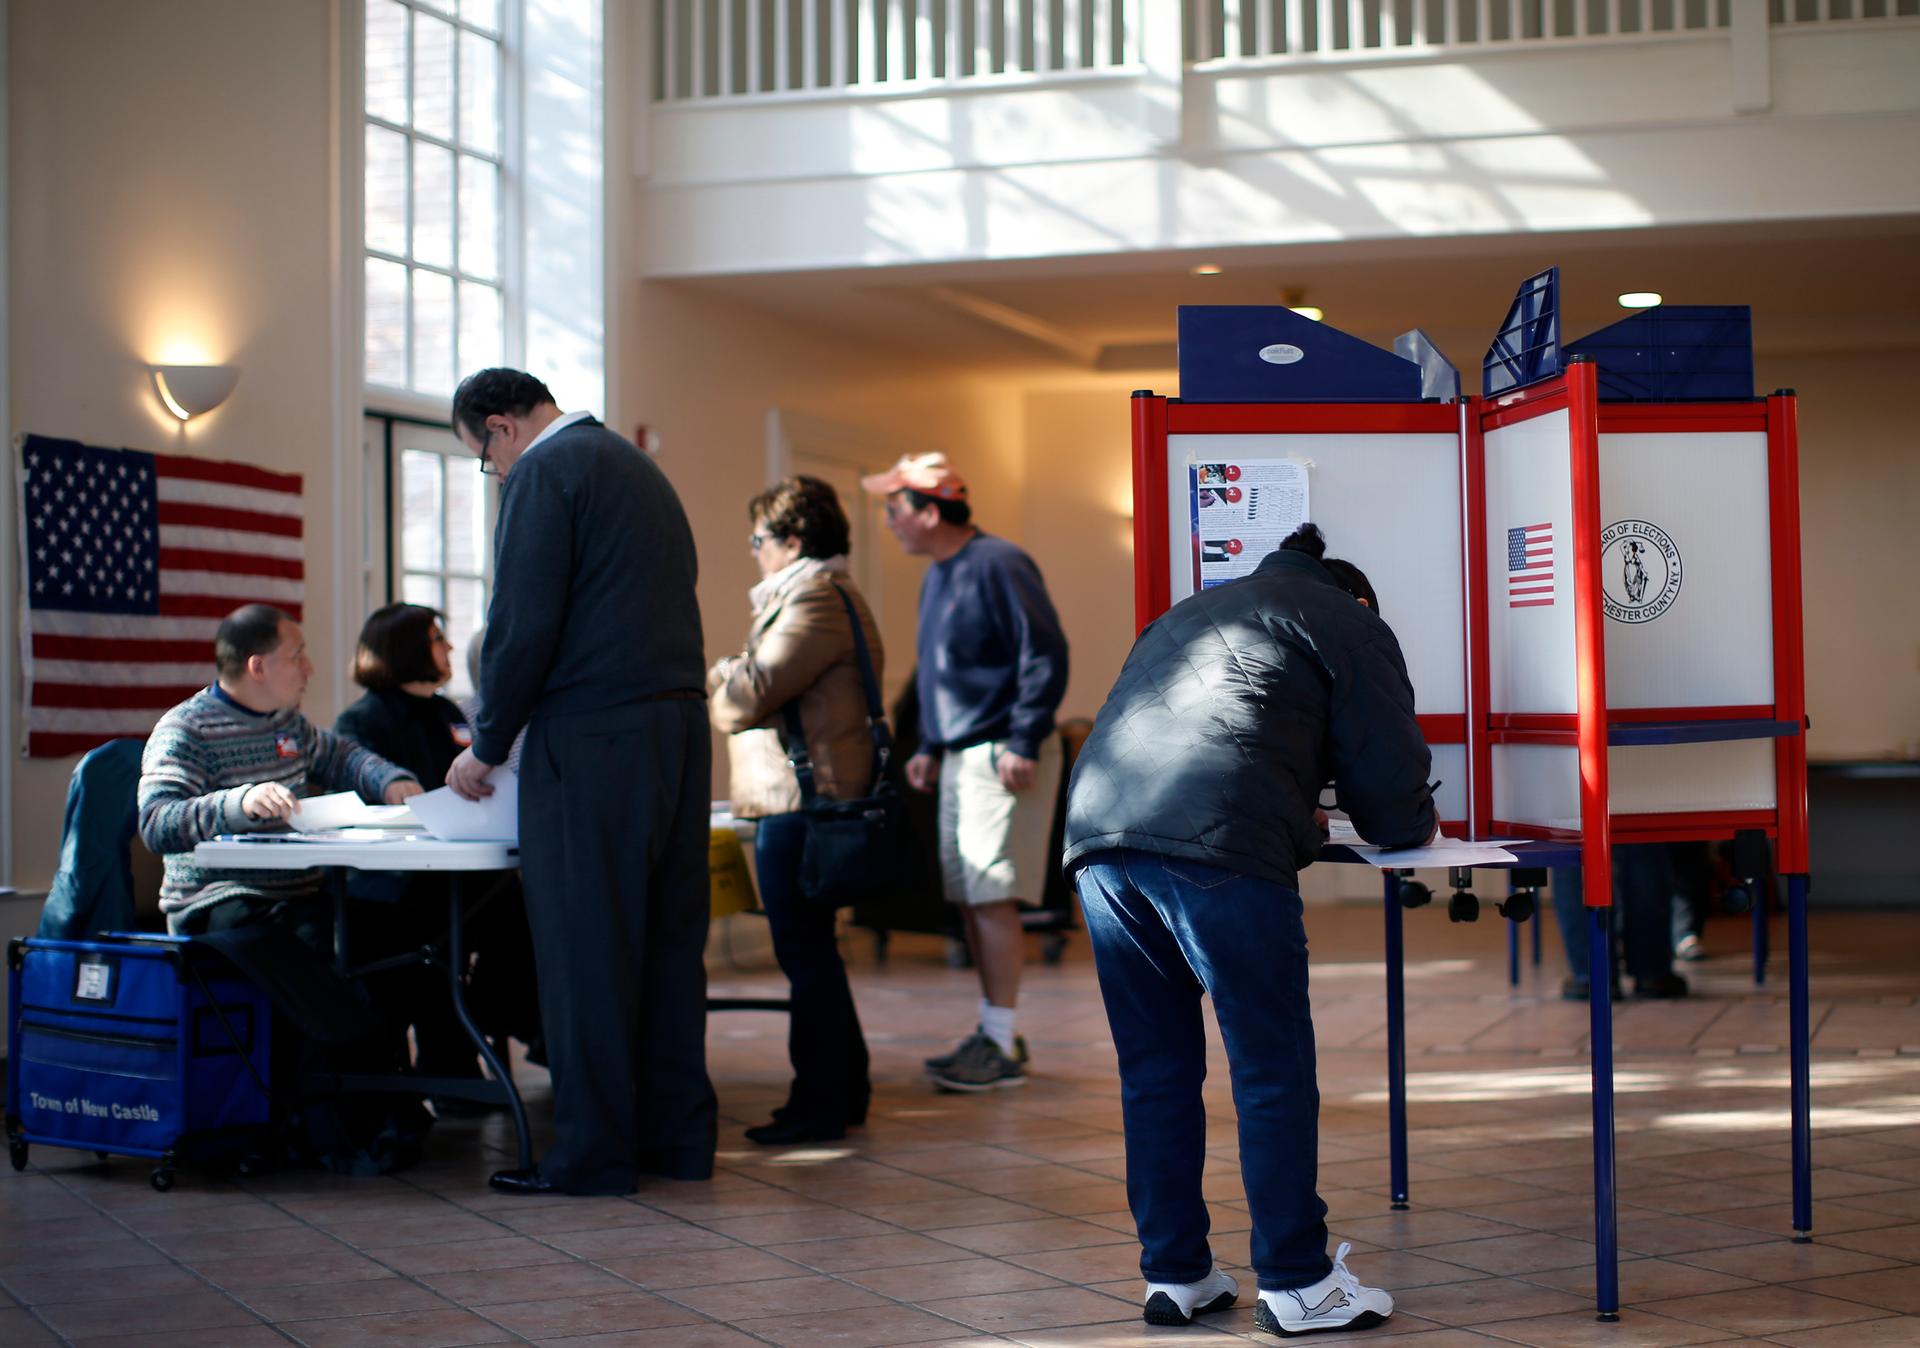 Voters sign in and fill out ballots and at a polling station at the Presbyterian Church in the town of Mount Kisco, New York, on November 4, 2014. Americans were heading to the polls Tuesday in the midterm elections.